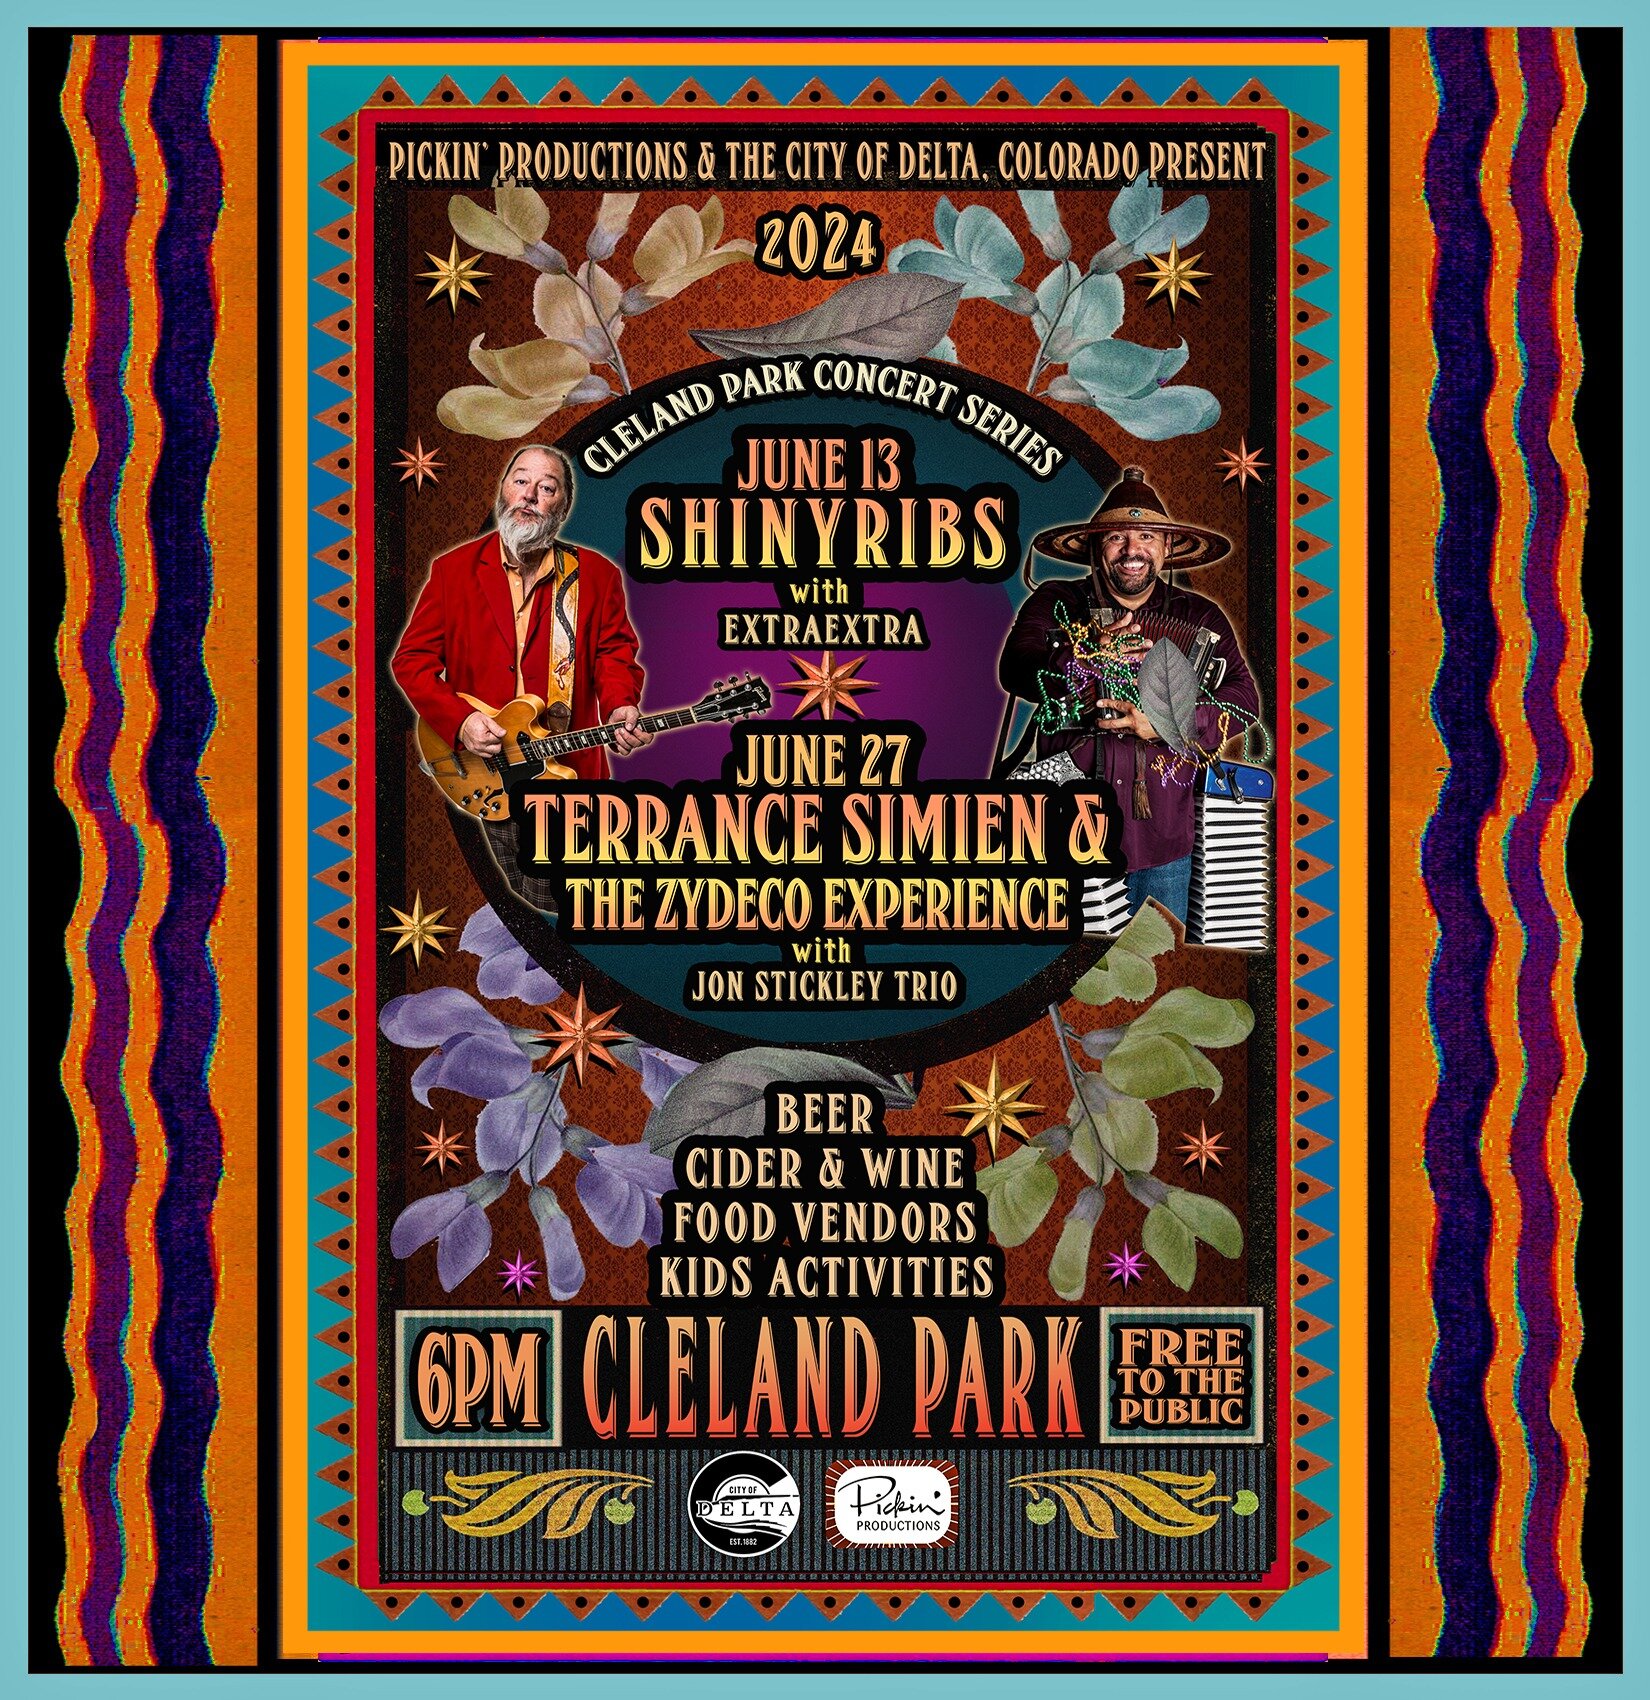 Pickin' Productions  and City Delta Colorado present the 2024 Cleland Park Concert Series! 🎼🎹🥁🎸

📣 Join us in June for two Thursdays of FREE music in Cleland Park!

June 13th: Shinyribs  with ExtraExtra 
June 27th: Terrance Simien &amp; The Zyde